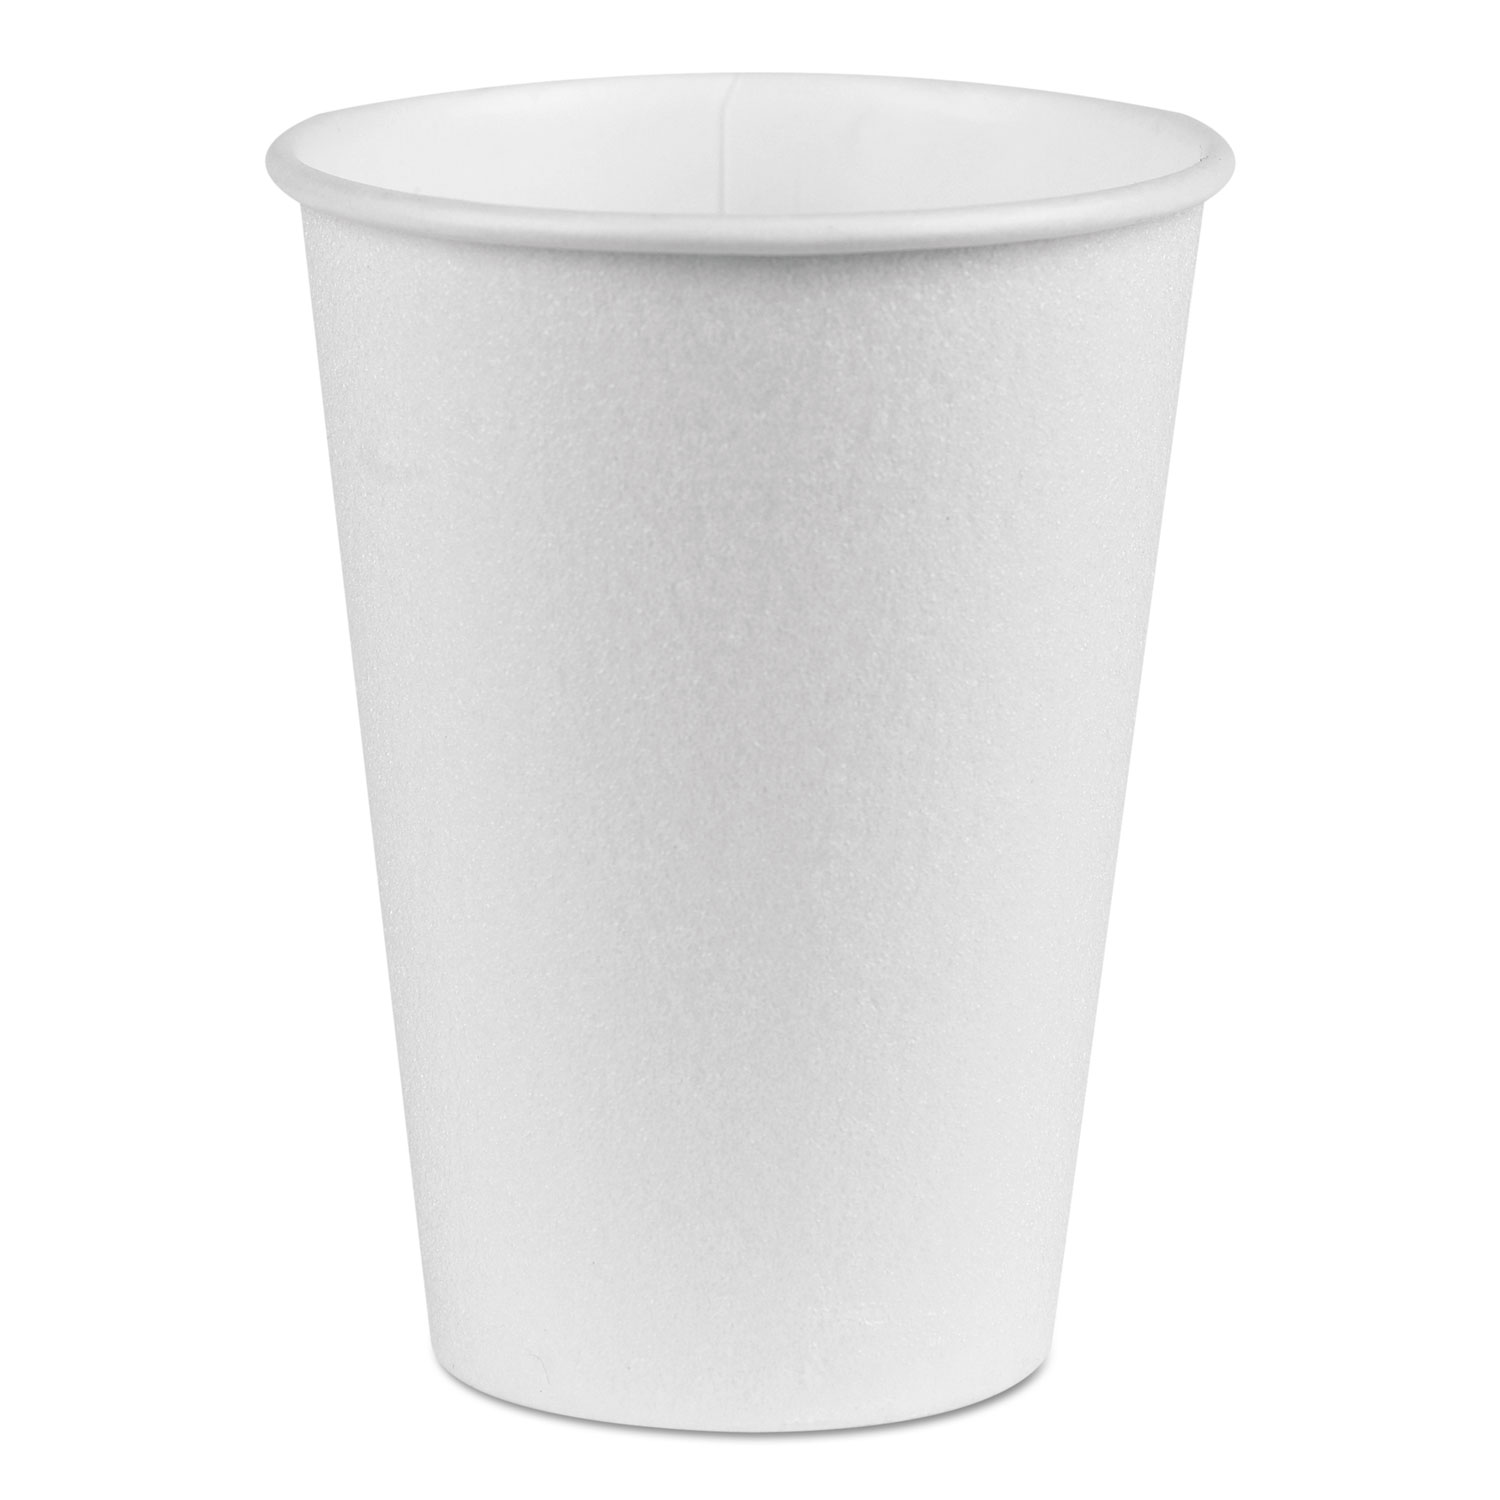 PerfecTouch Hot/Cold Cups, 12 oz., White, 50/Bag, 20 Bags/Carton